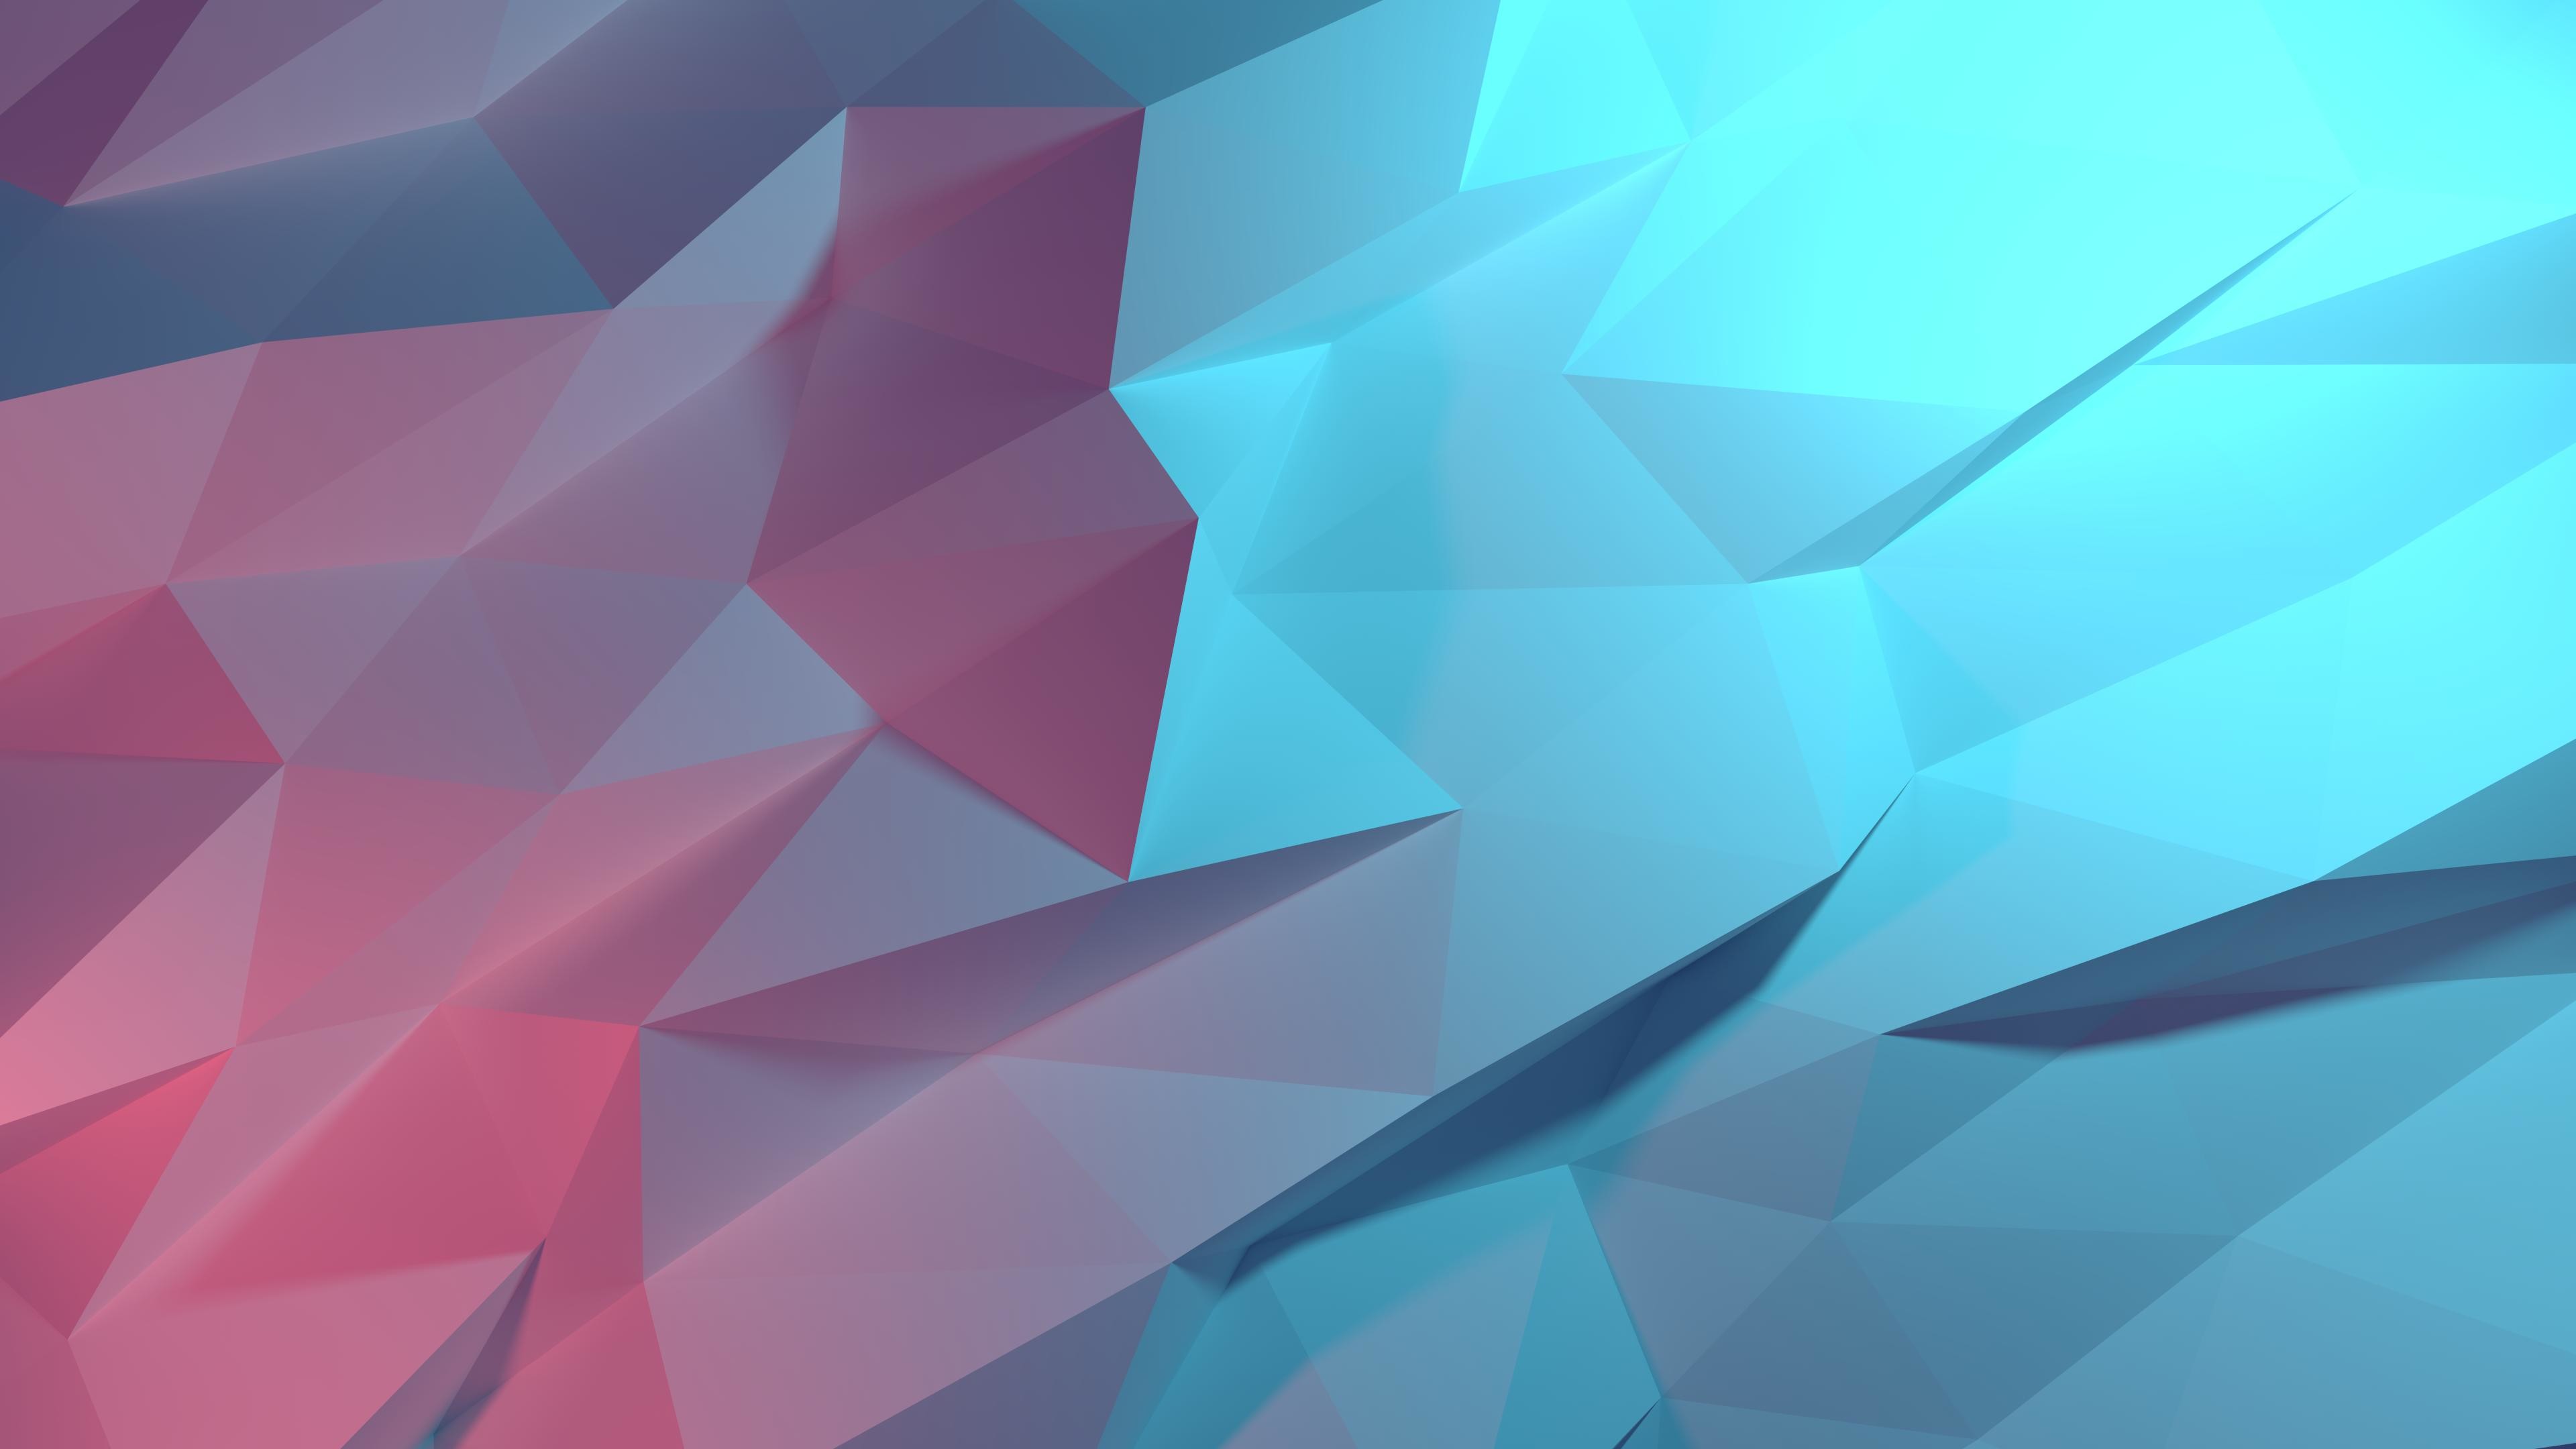 3840x2160 First Project - Low Poly Wallpaper [2560x1440p] ...